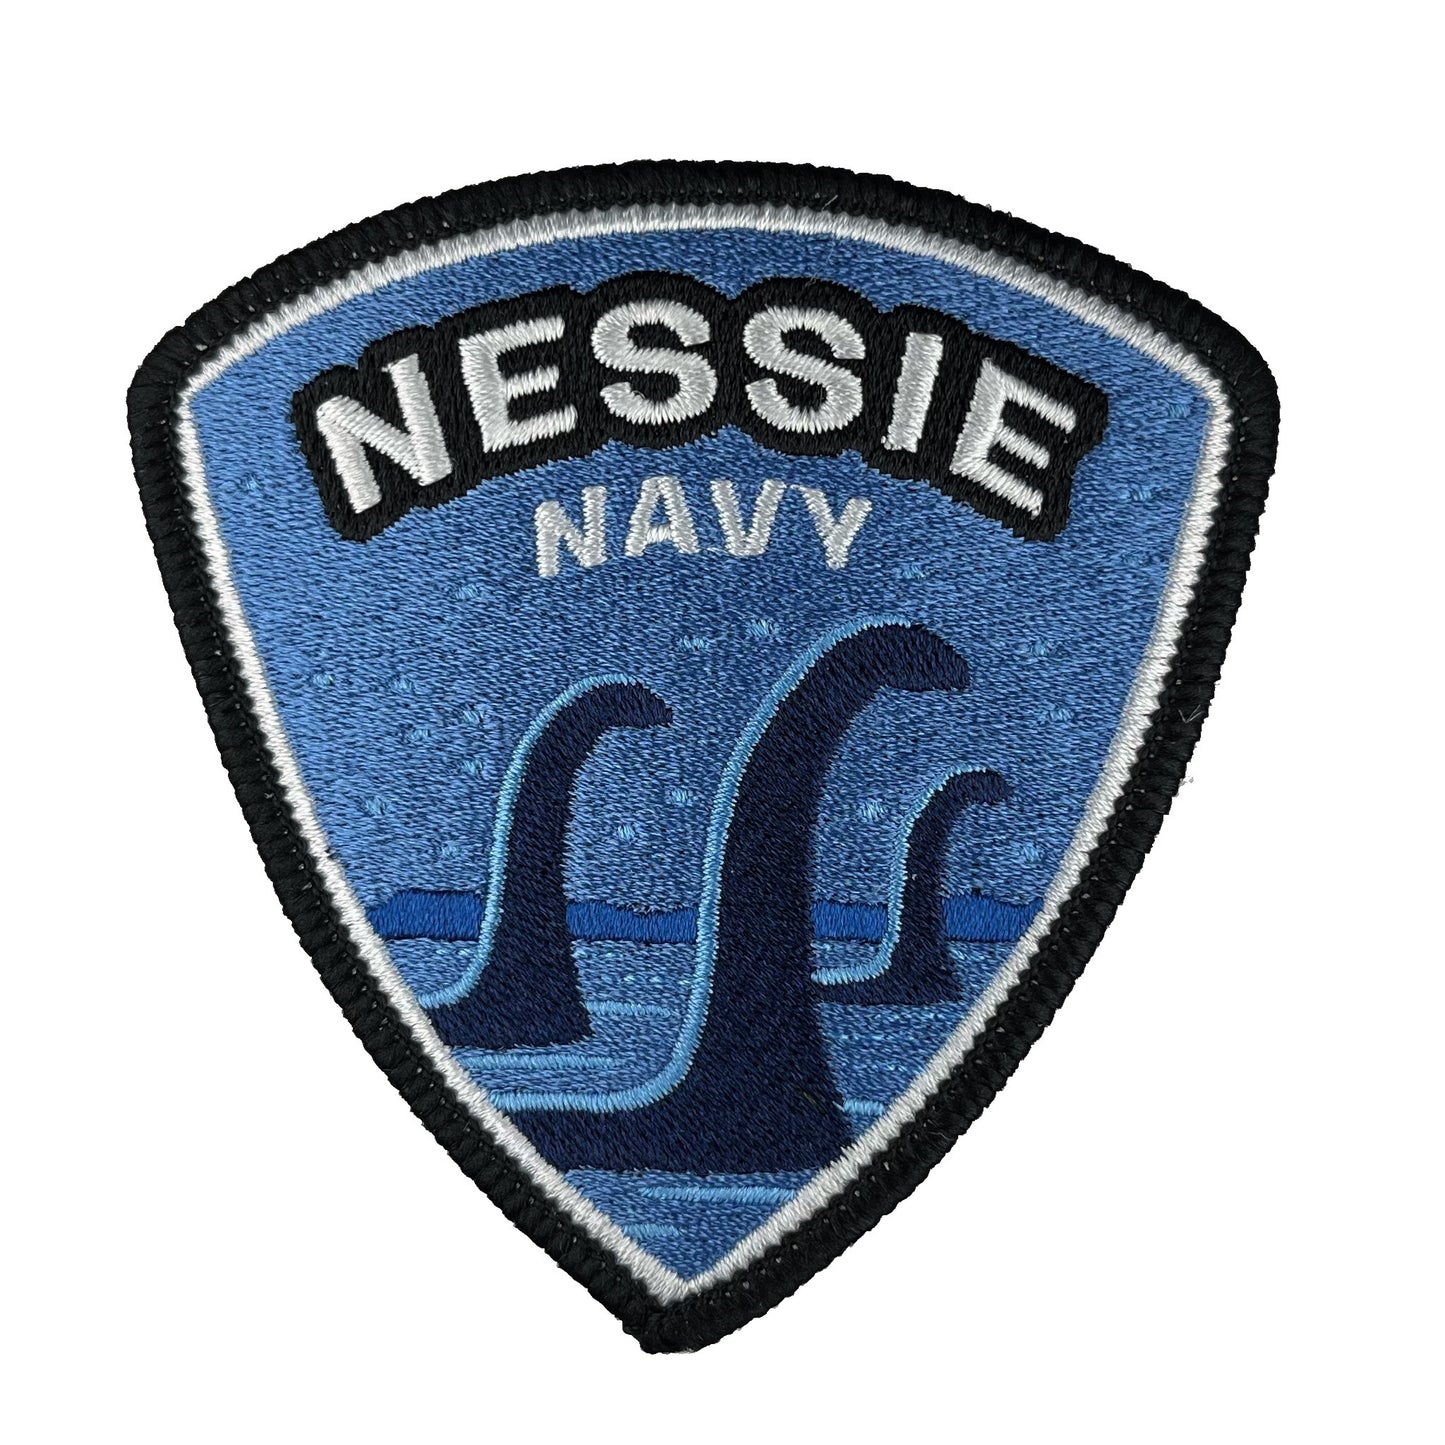 Nessie Navy Loch Ness Monster cryptozoology military embroidered morale patch by Monsterologist